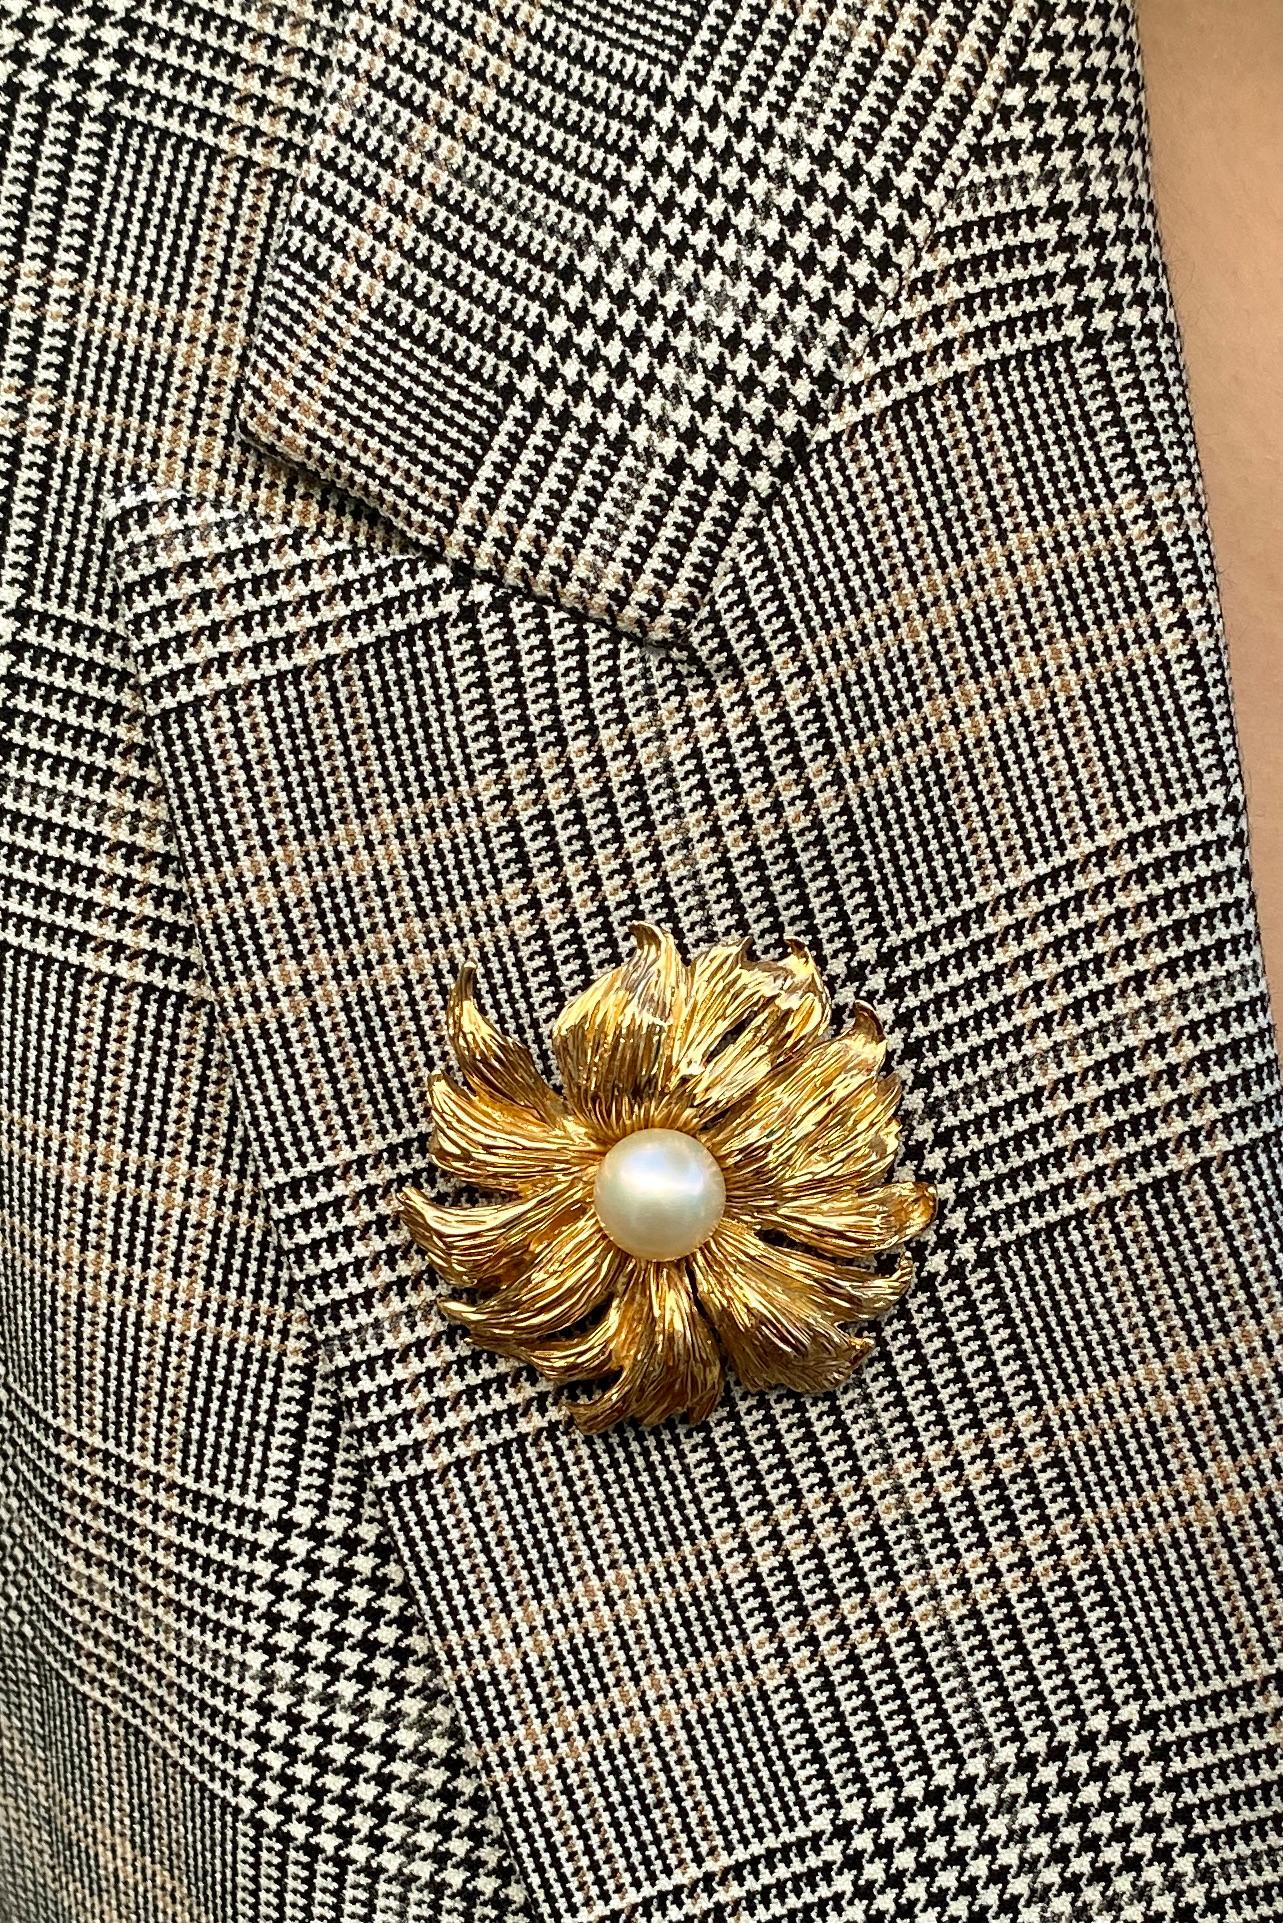 A beautiful vintage flower brooch rendered in solid 14K yellow gold with a cultured pearl at the center and a pin closure.

The brooch measures 42.5mm (1 2/3 inches) in diameter, and the central pearl measures 9.7mm in diameter. It weighs 17.7 grams